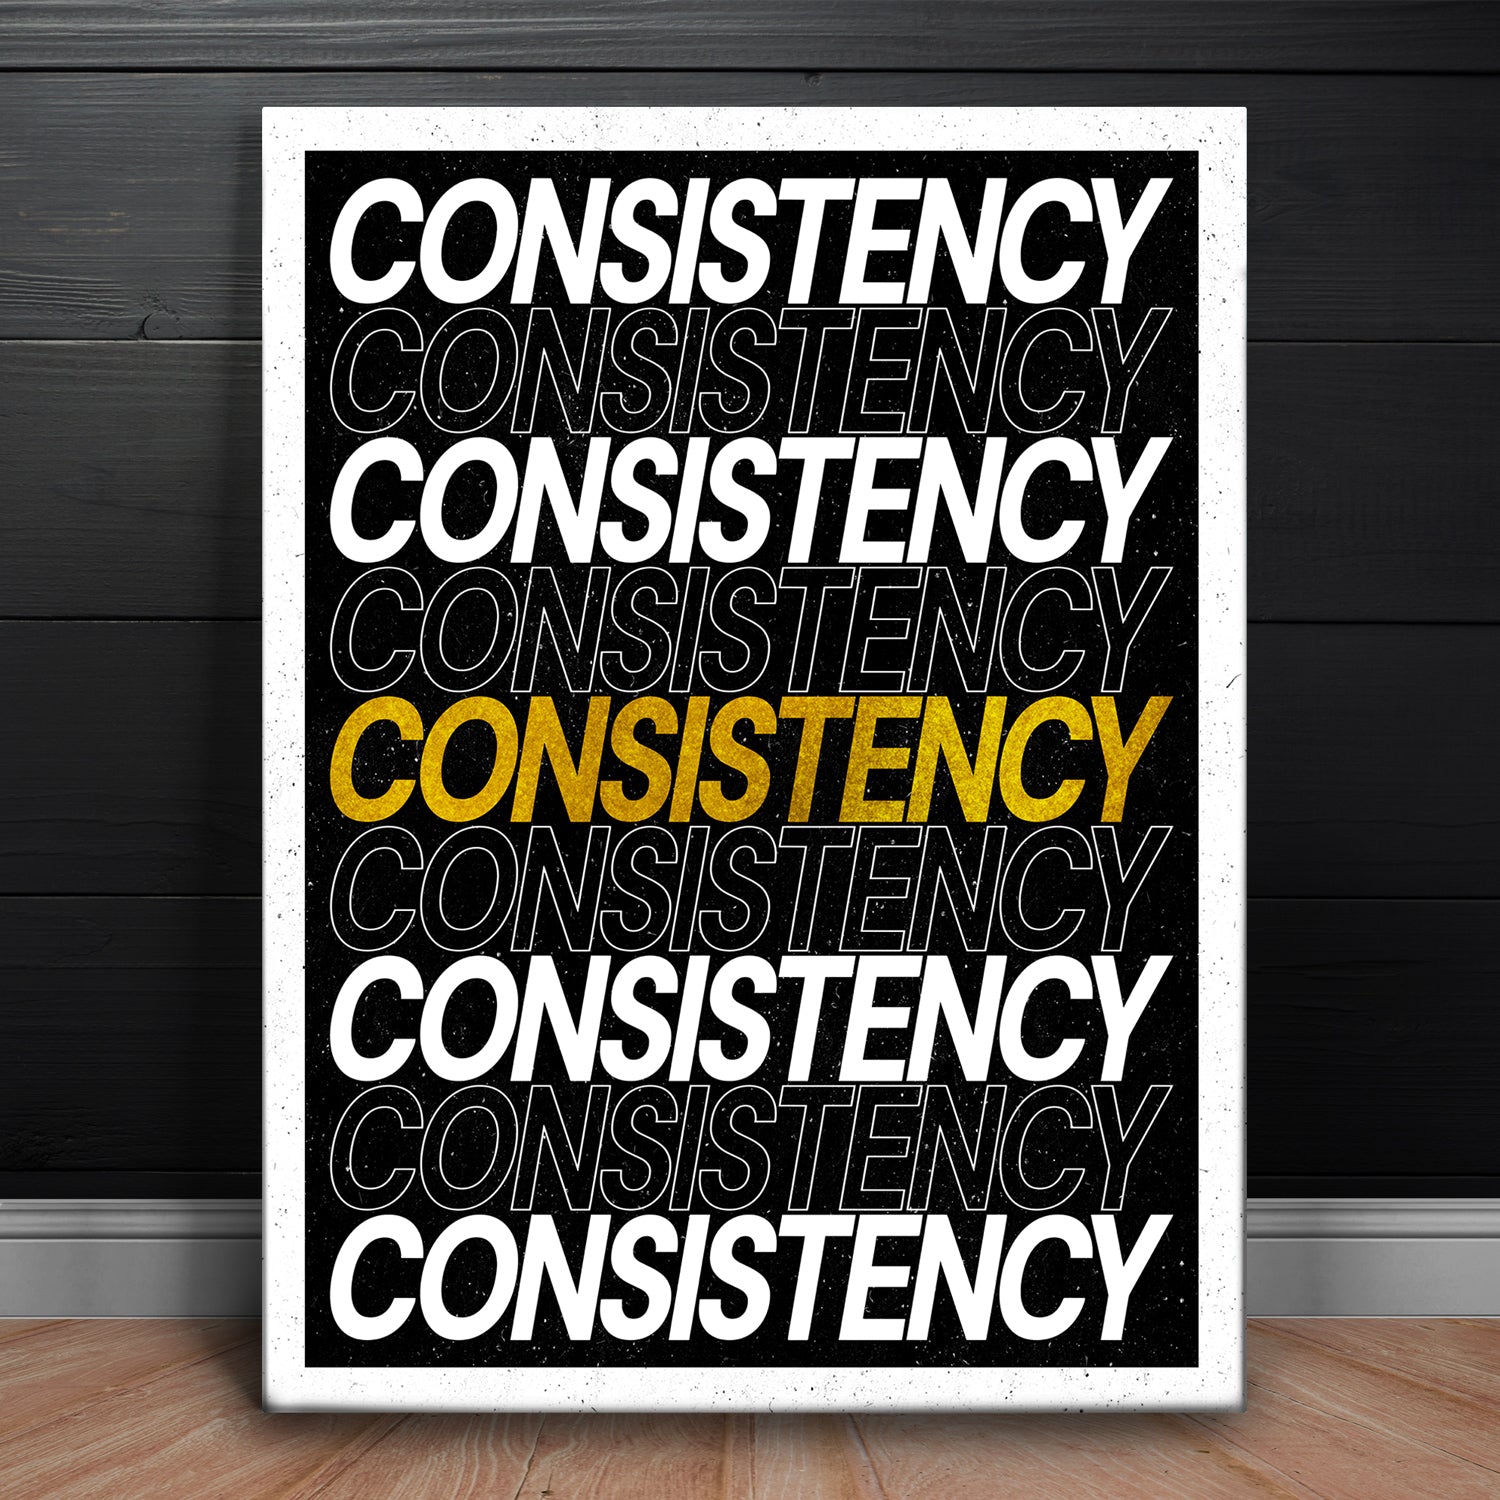 Consistency Stacks Up